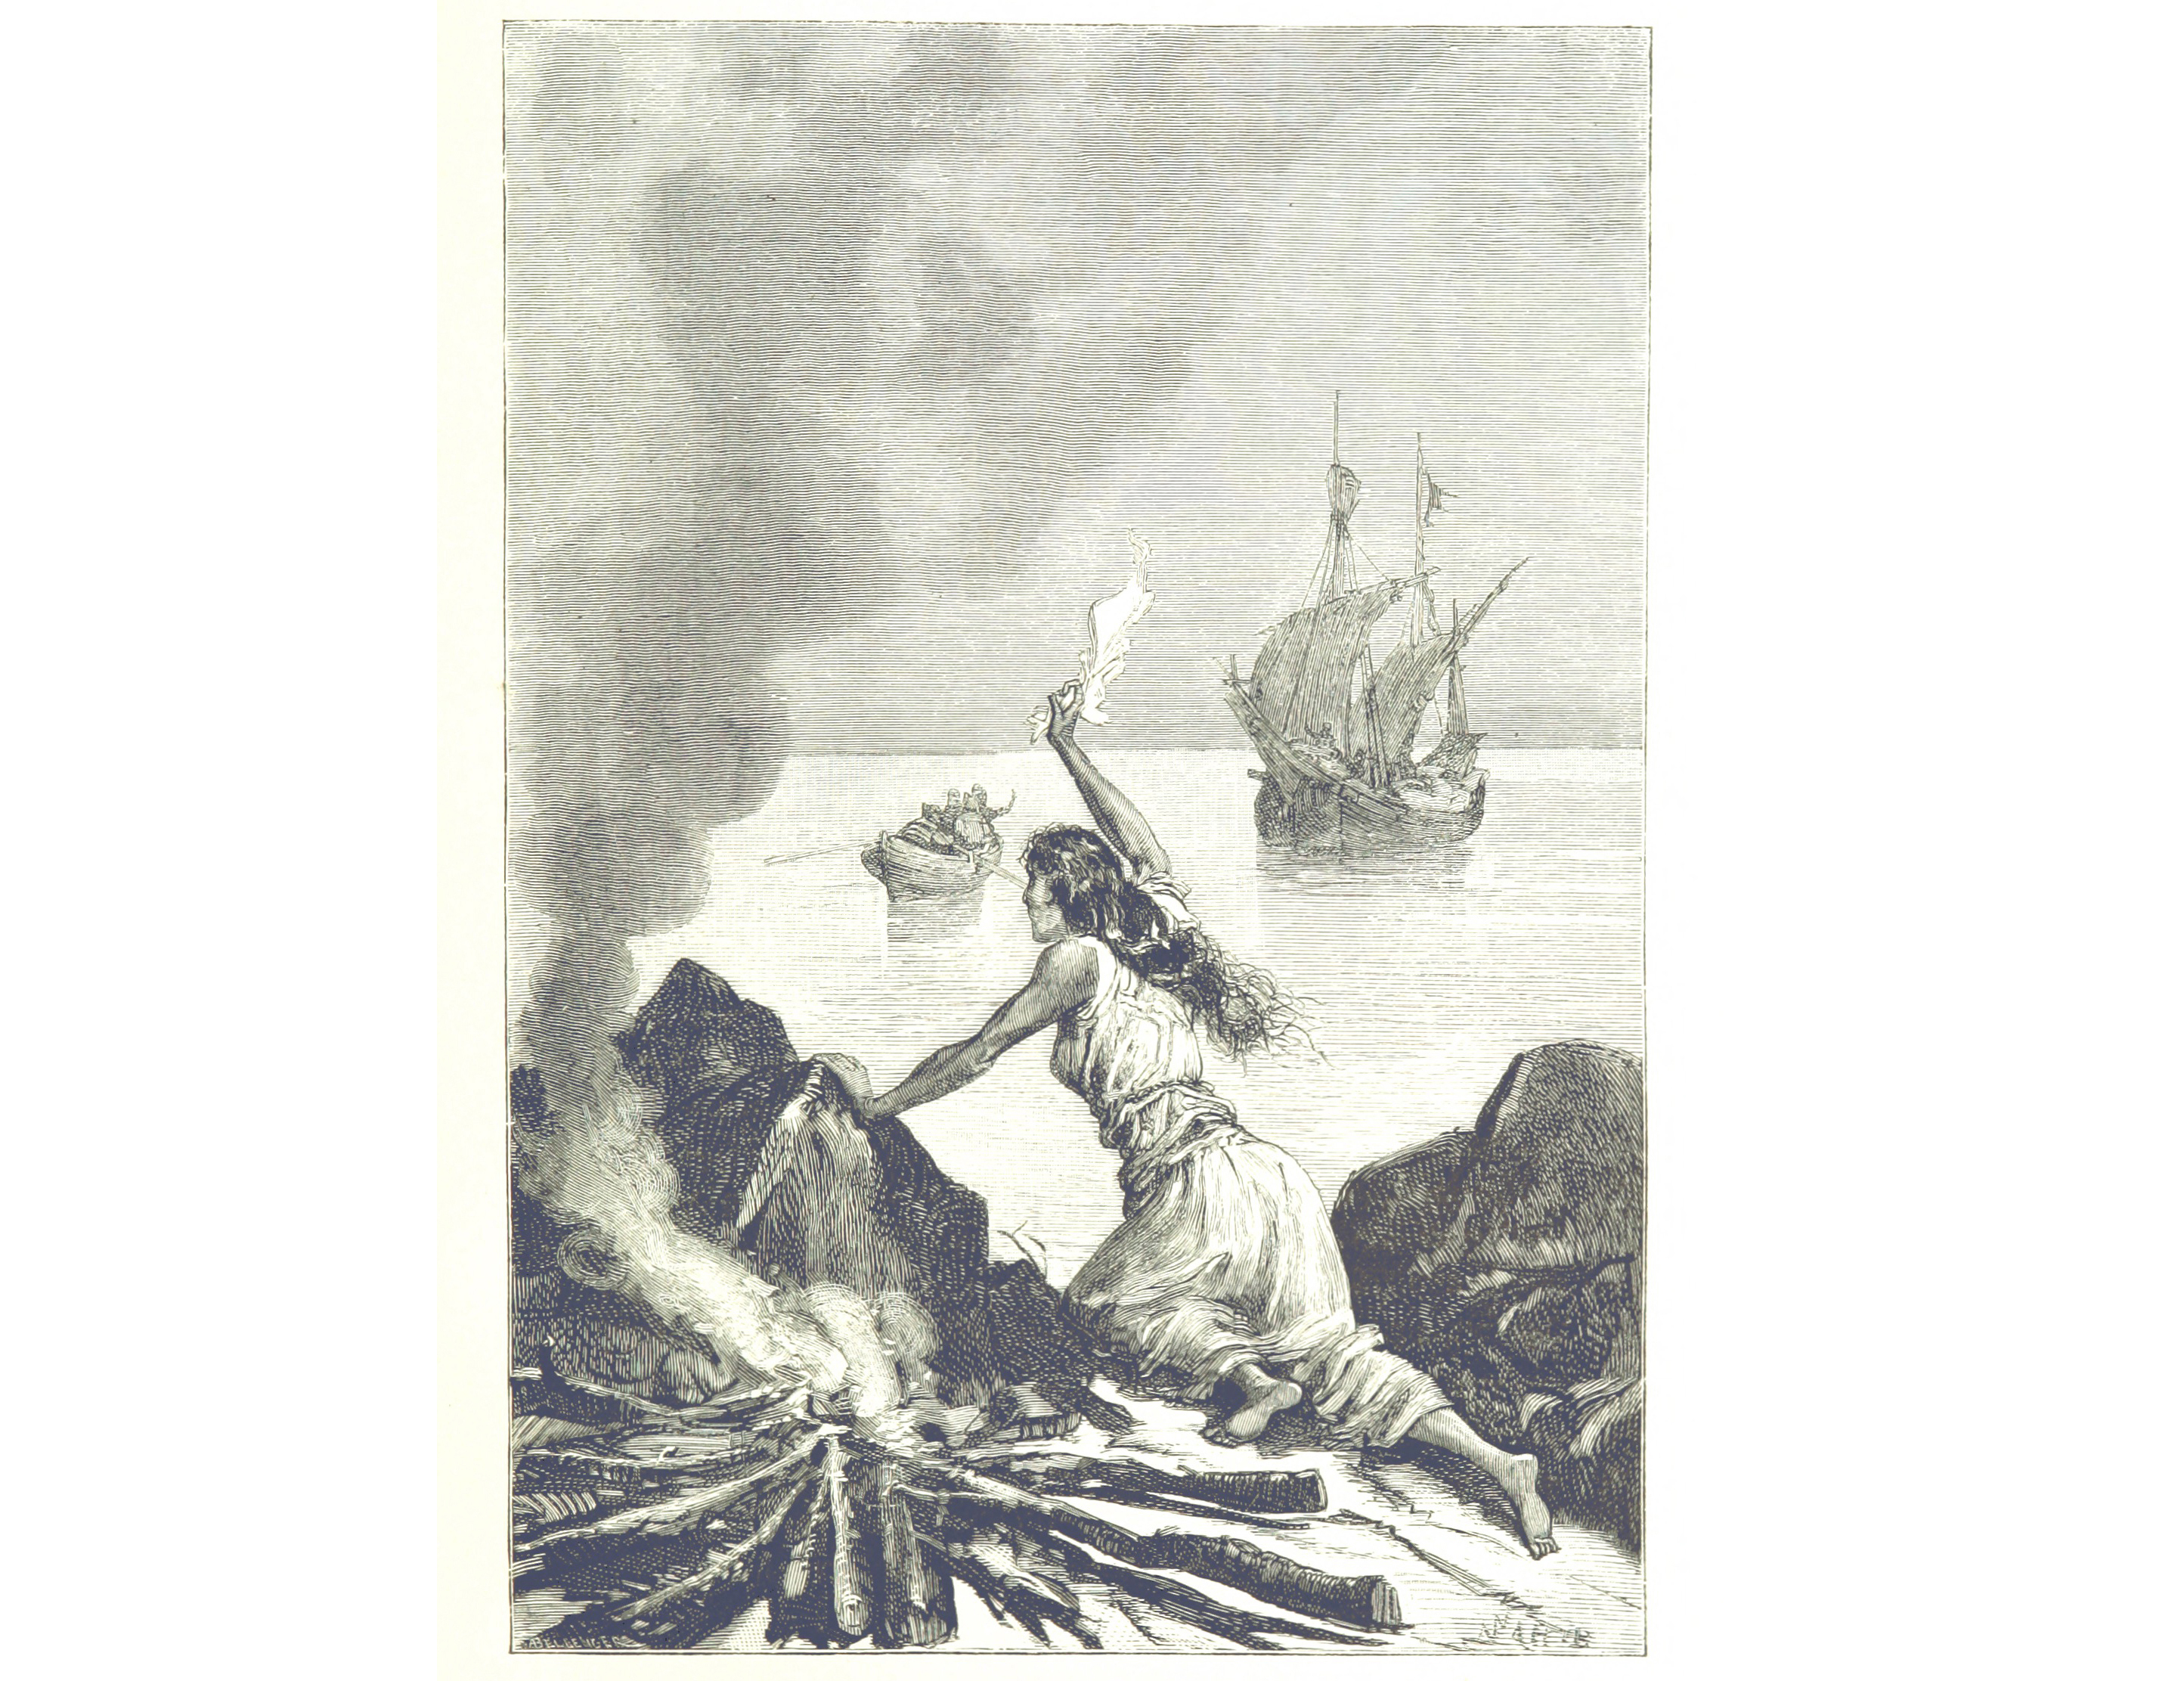 Illustration of Marguerite de Roberval on the island signaling a ship in the distance.